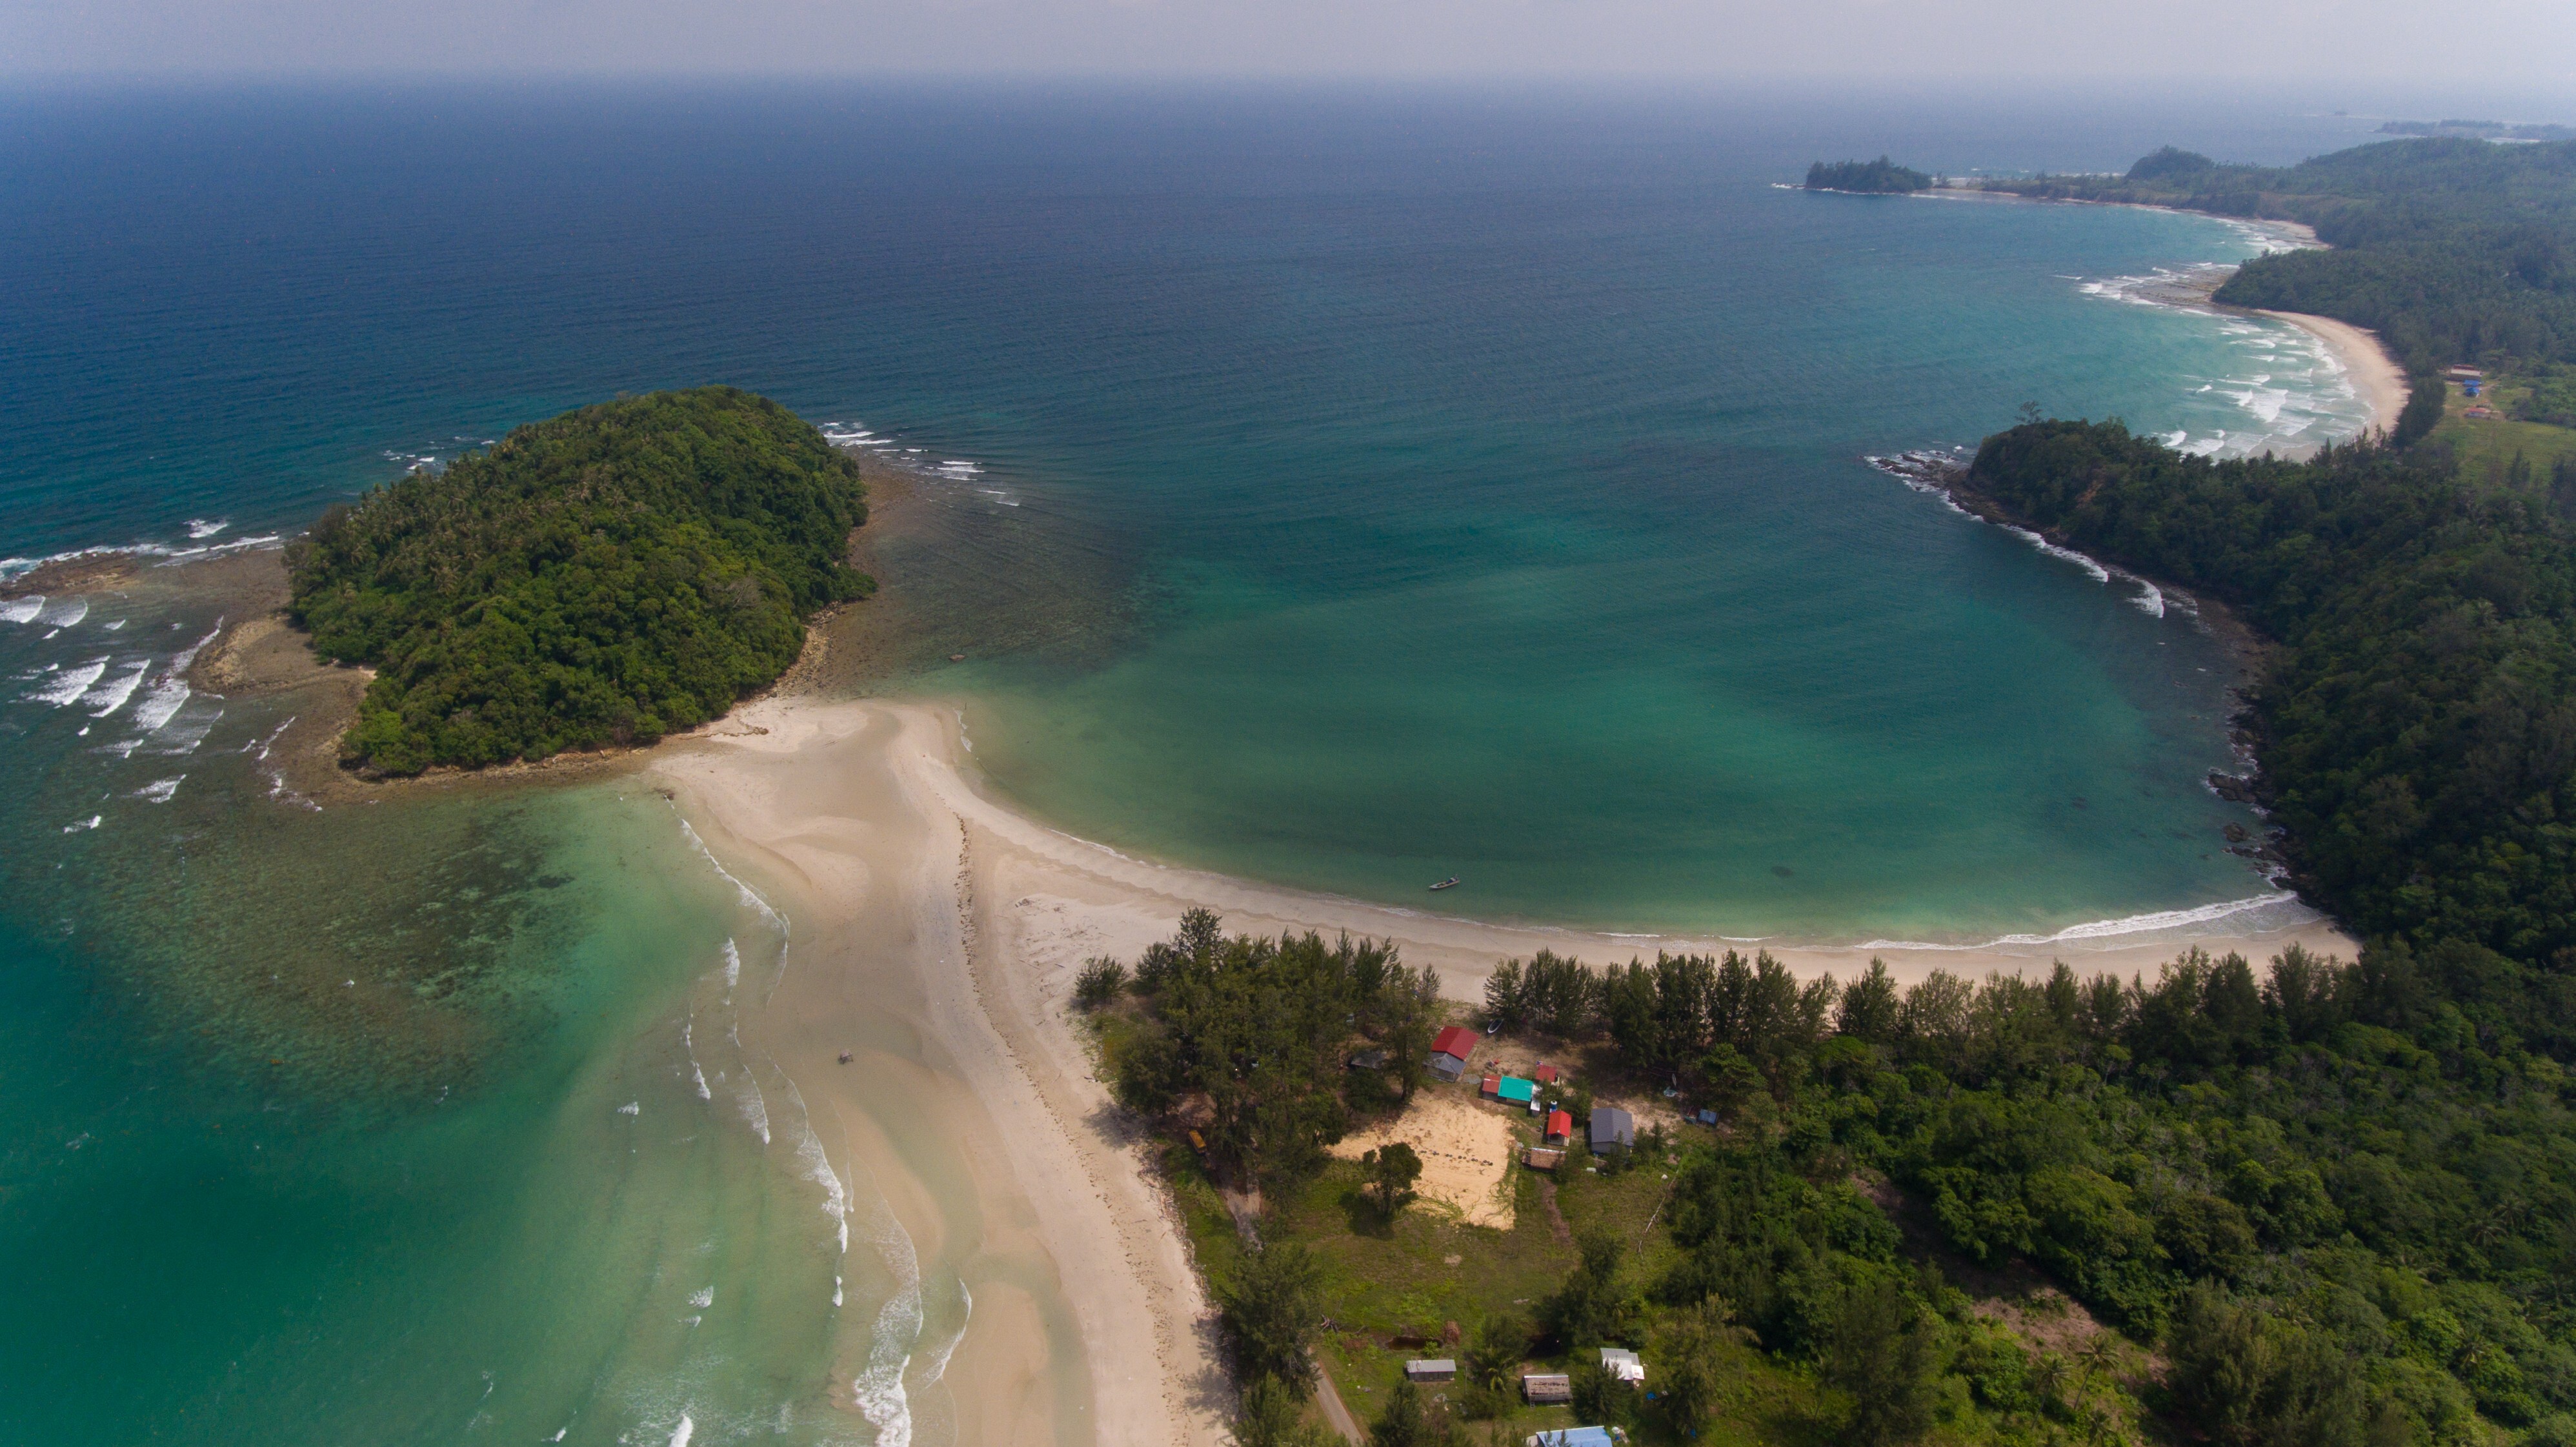 An aerial view of a Malaysian beach in Kudat, Sabah. Photo: Shutterstock